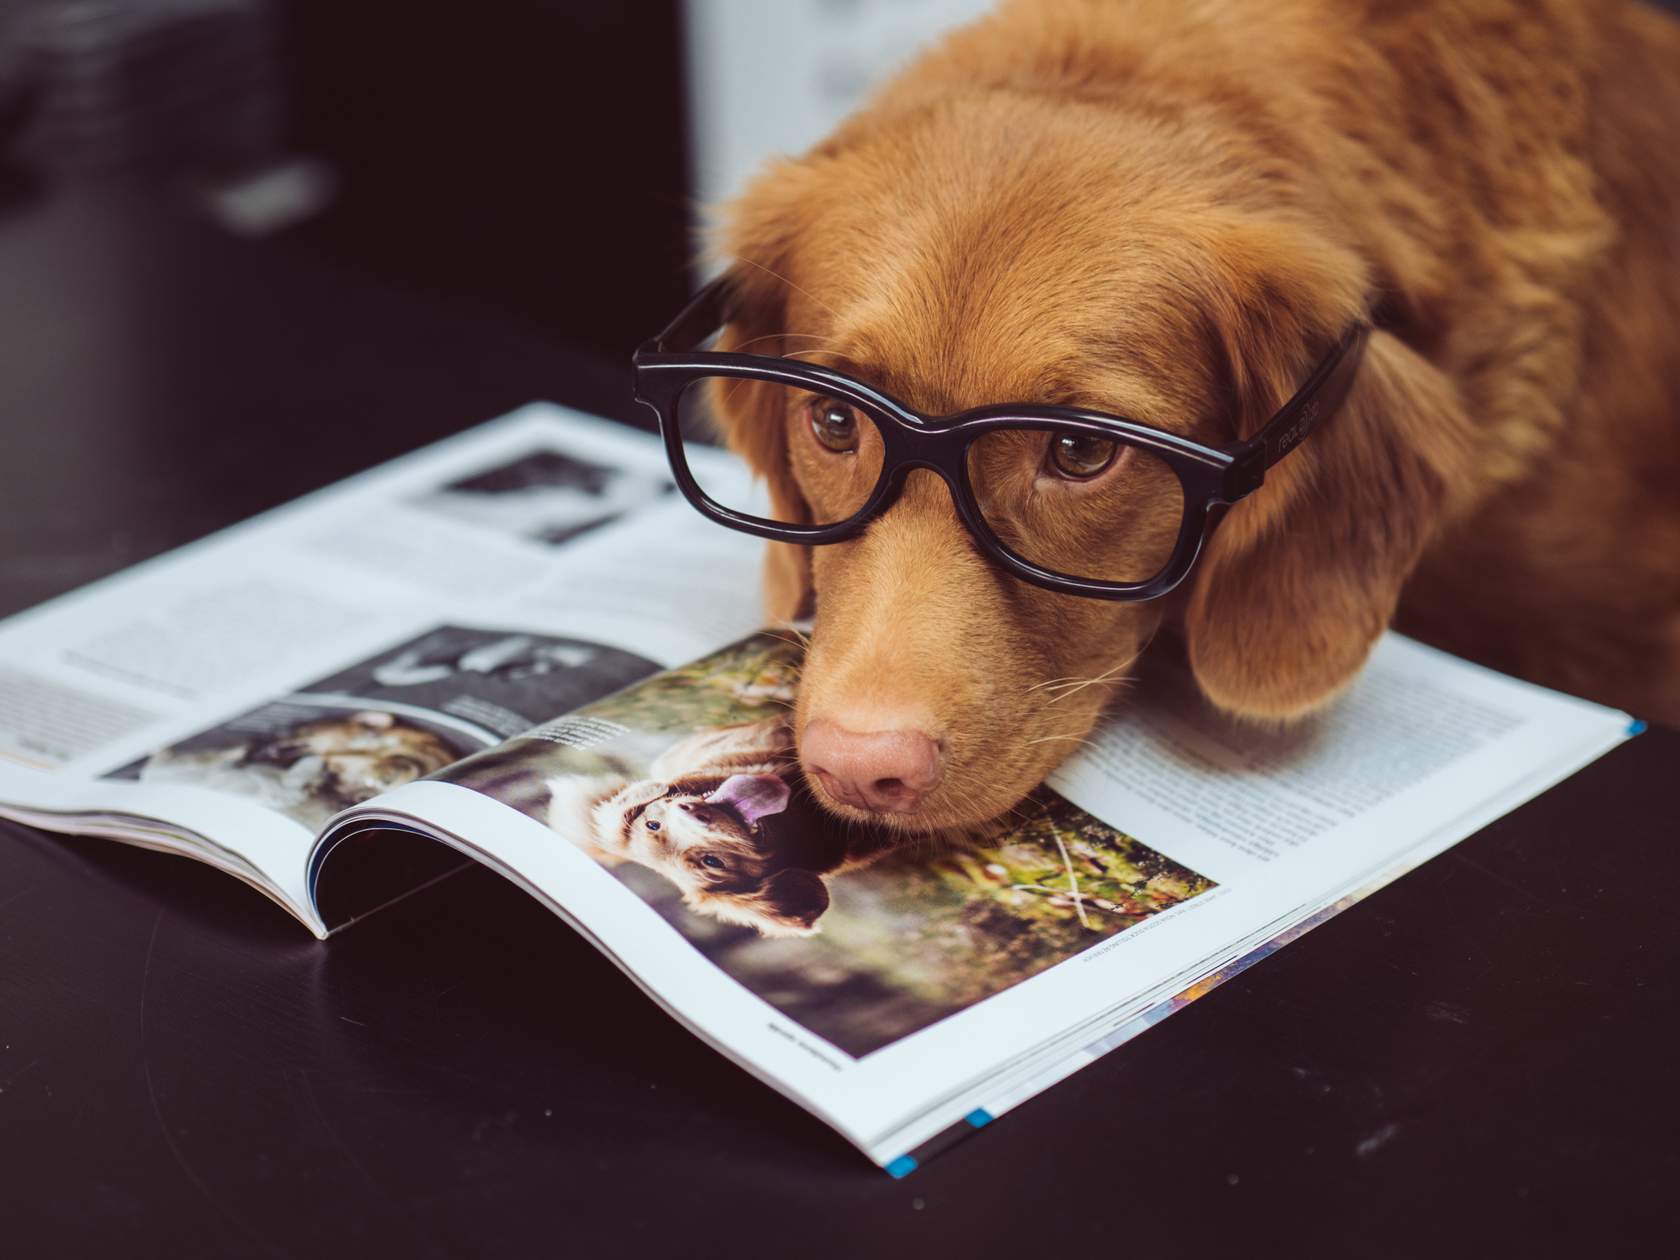 A non-human animal wearing glasses reading a magazine.